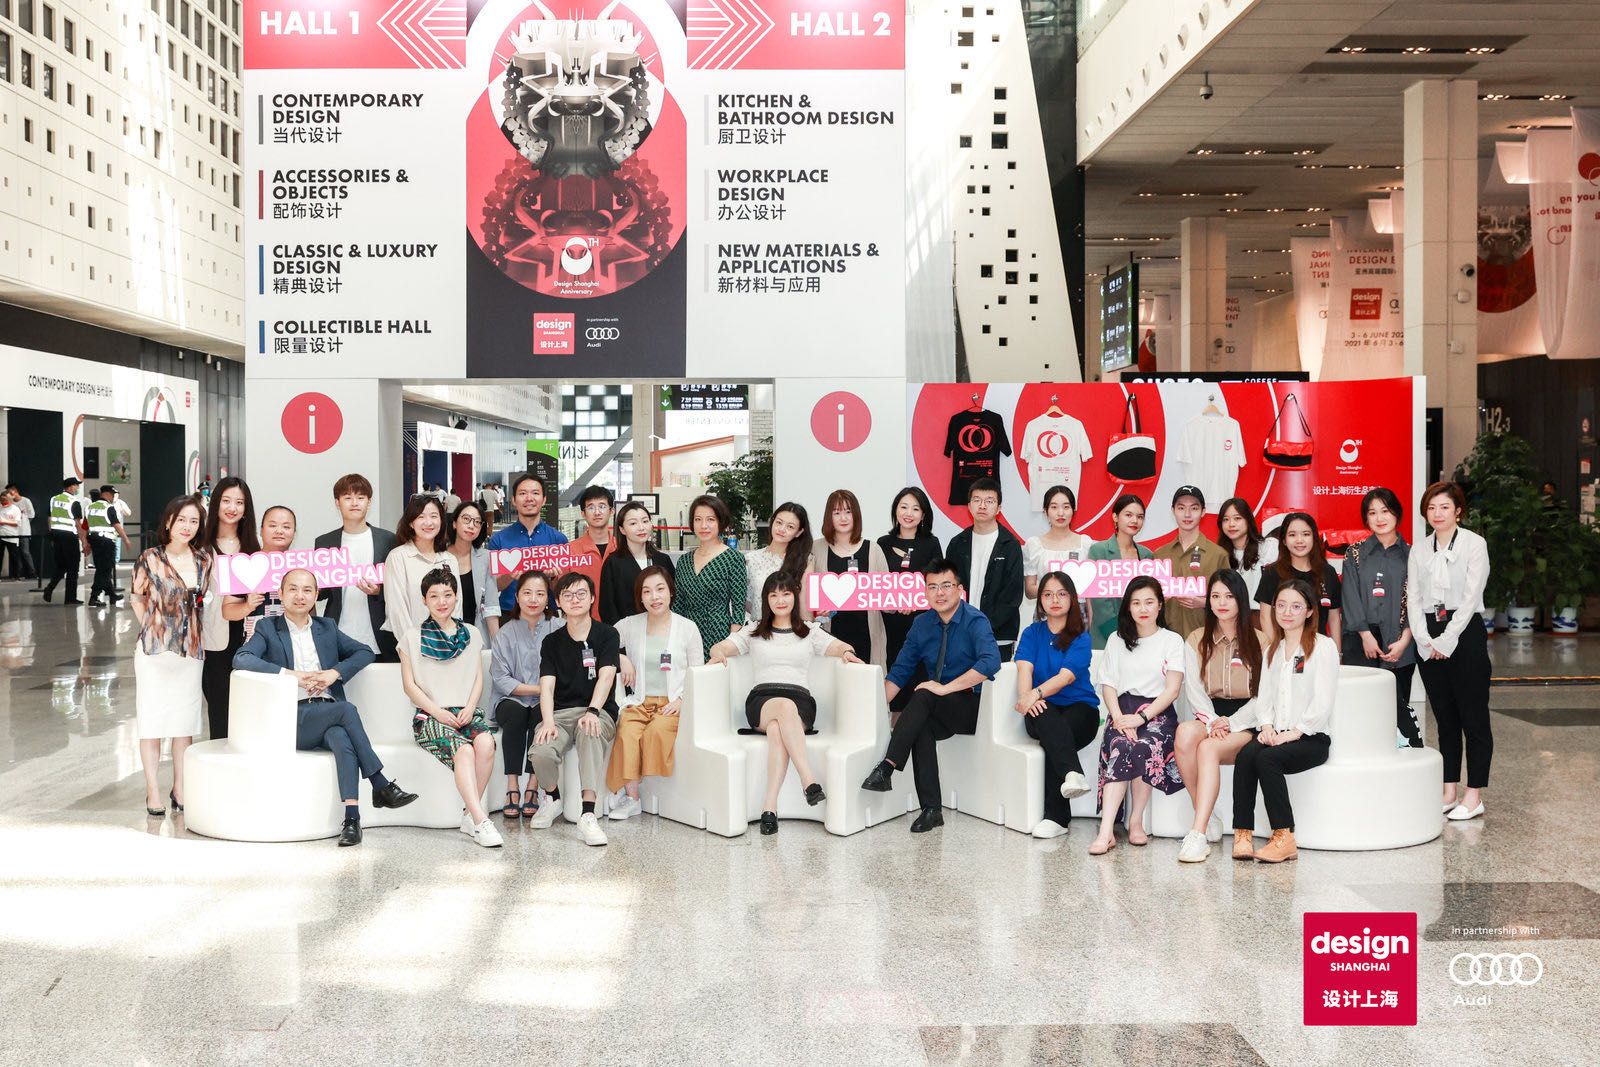 Design Shanghai 8th Edition Welcomed Over 70,000 Visitors During the Last 4 Days